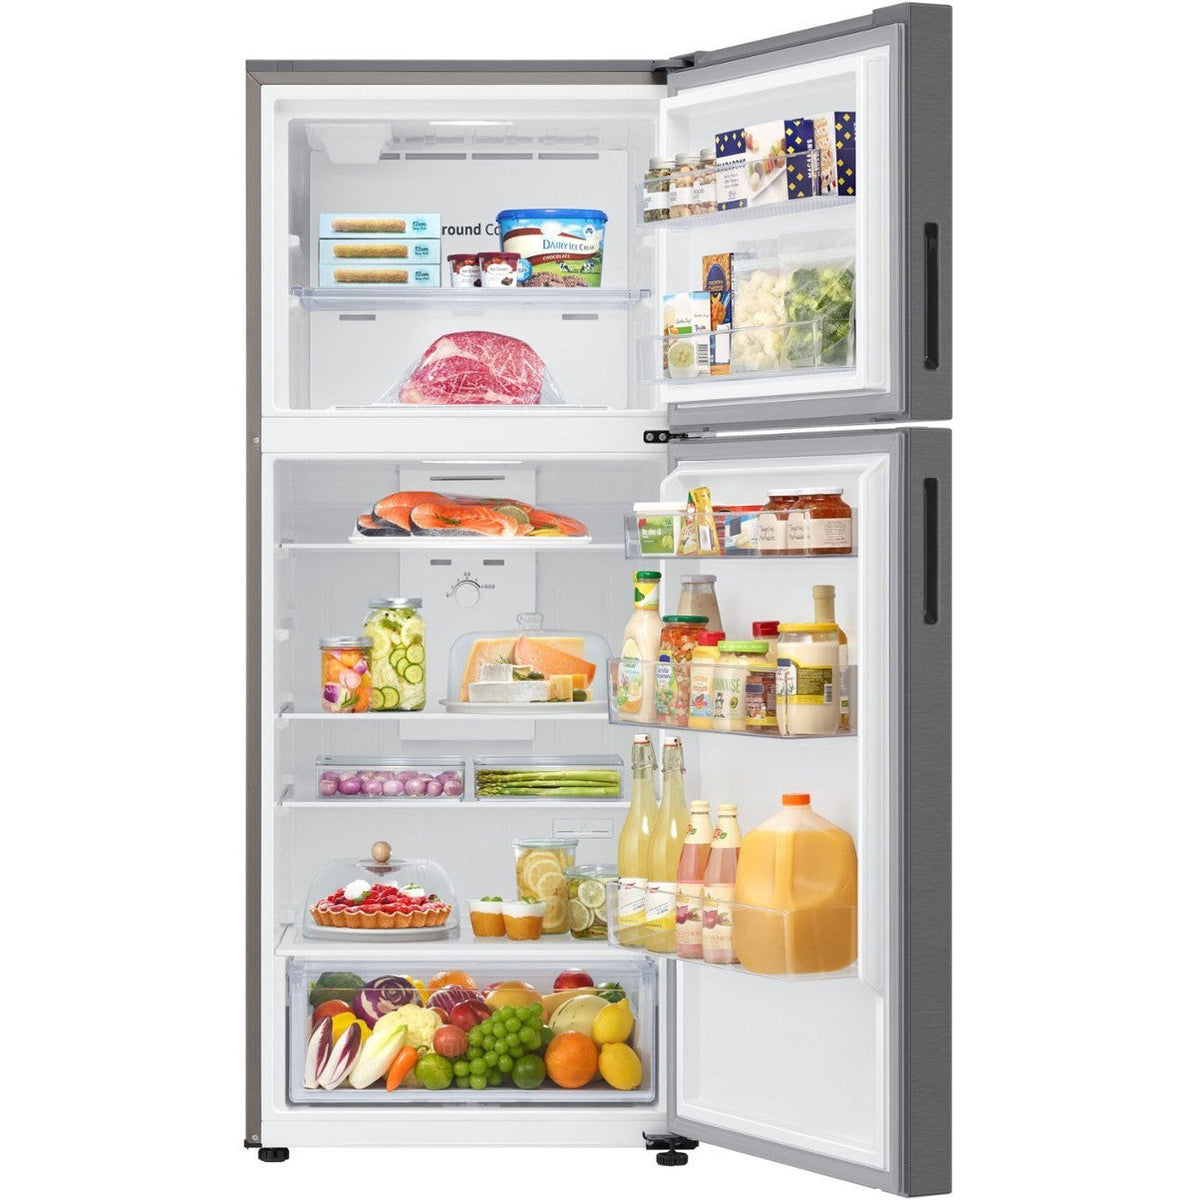 SAMSUNG RT16A6195SR/AA 15.6 cu. ft. Top Freezer Refrigerator in Stainless Steel